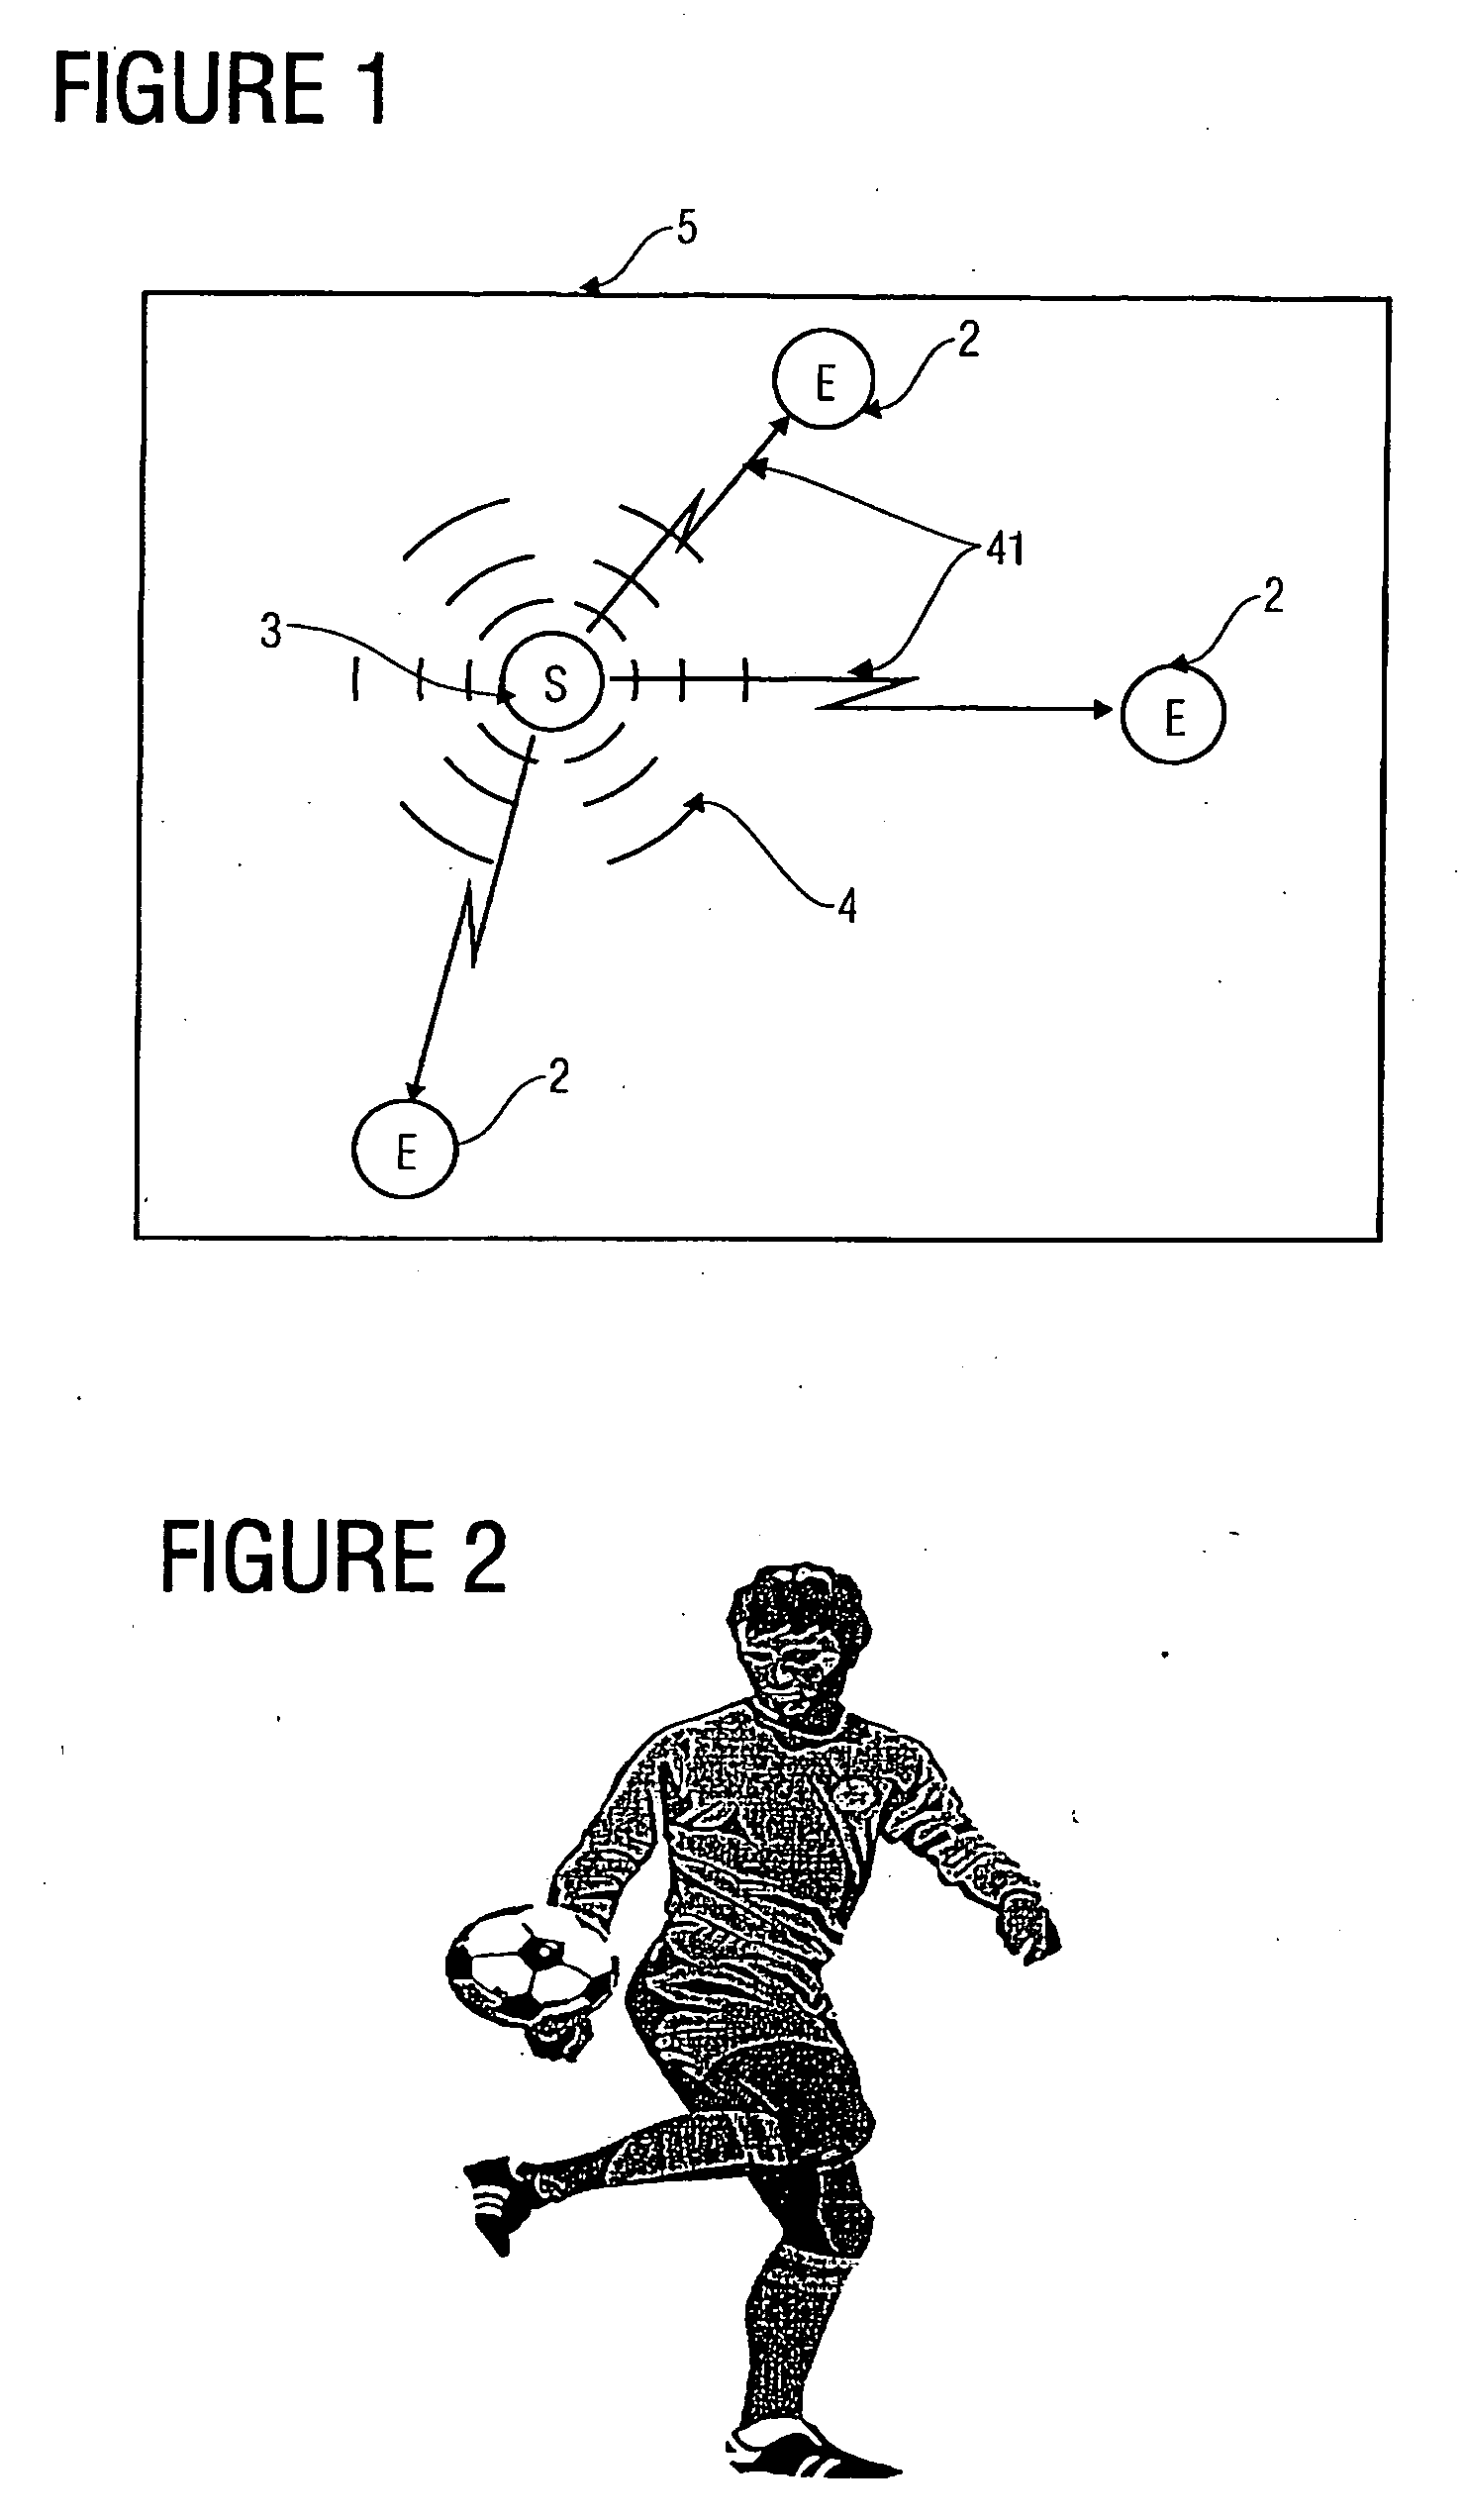 Device and method for measuring a rotational frequency of a movable game device